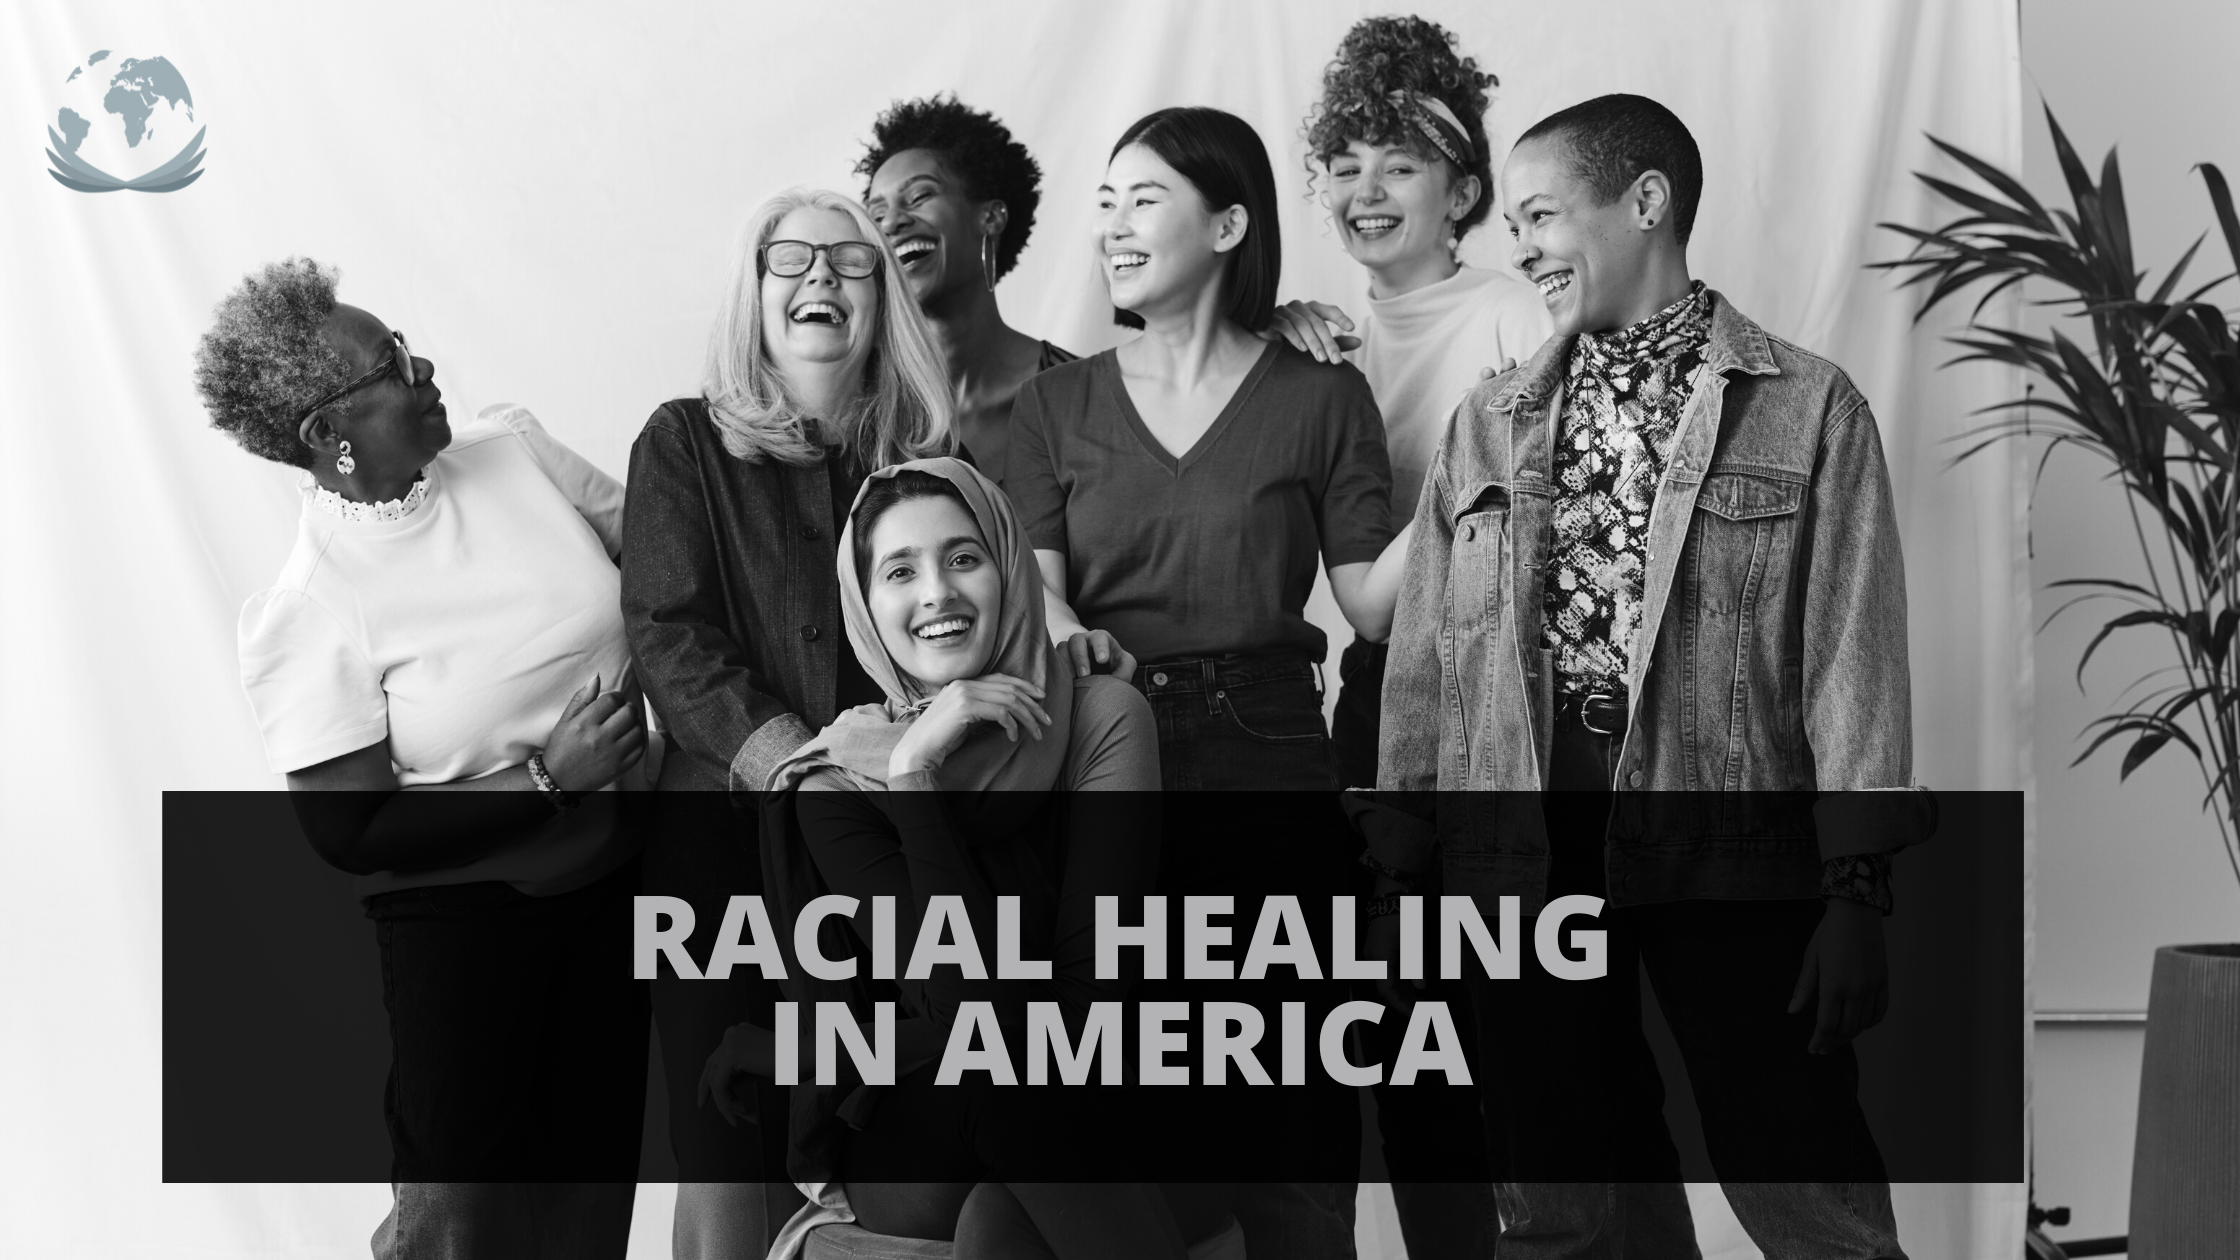 The Truth Behind Racial Healing in America